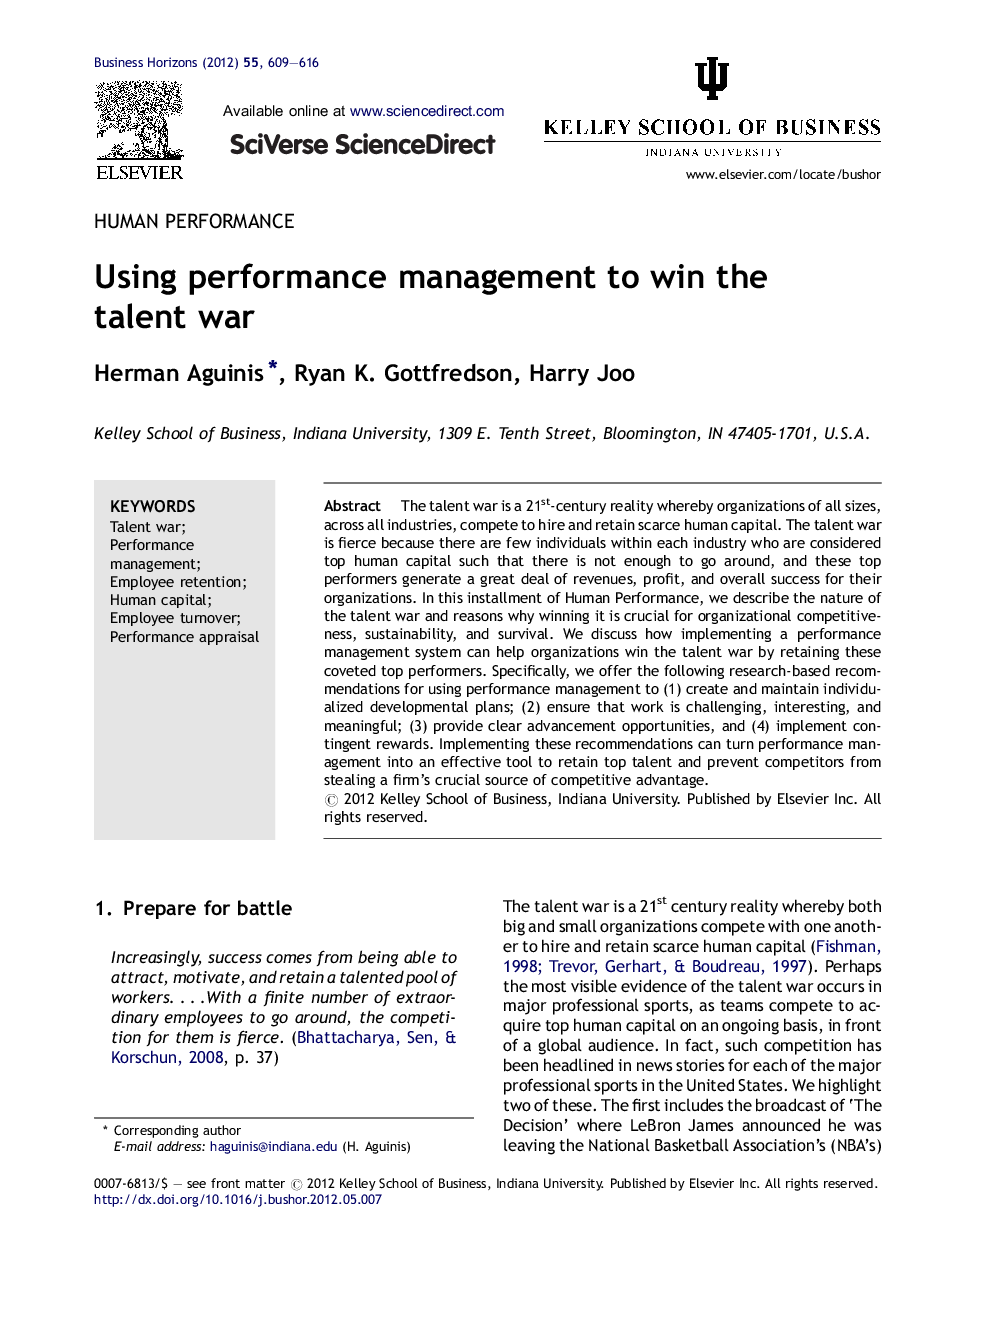 Using performance management to win the talent war